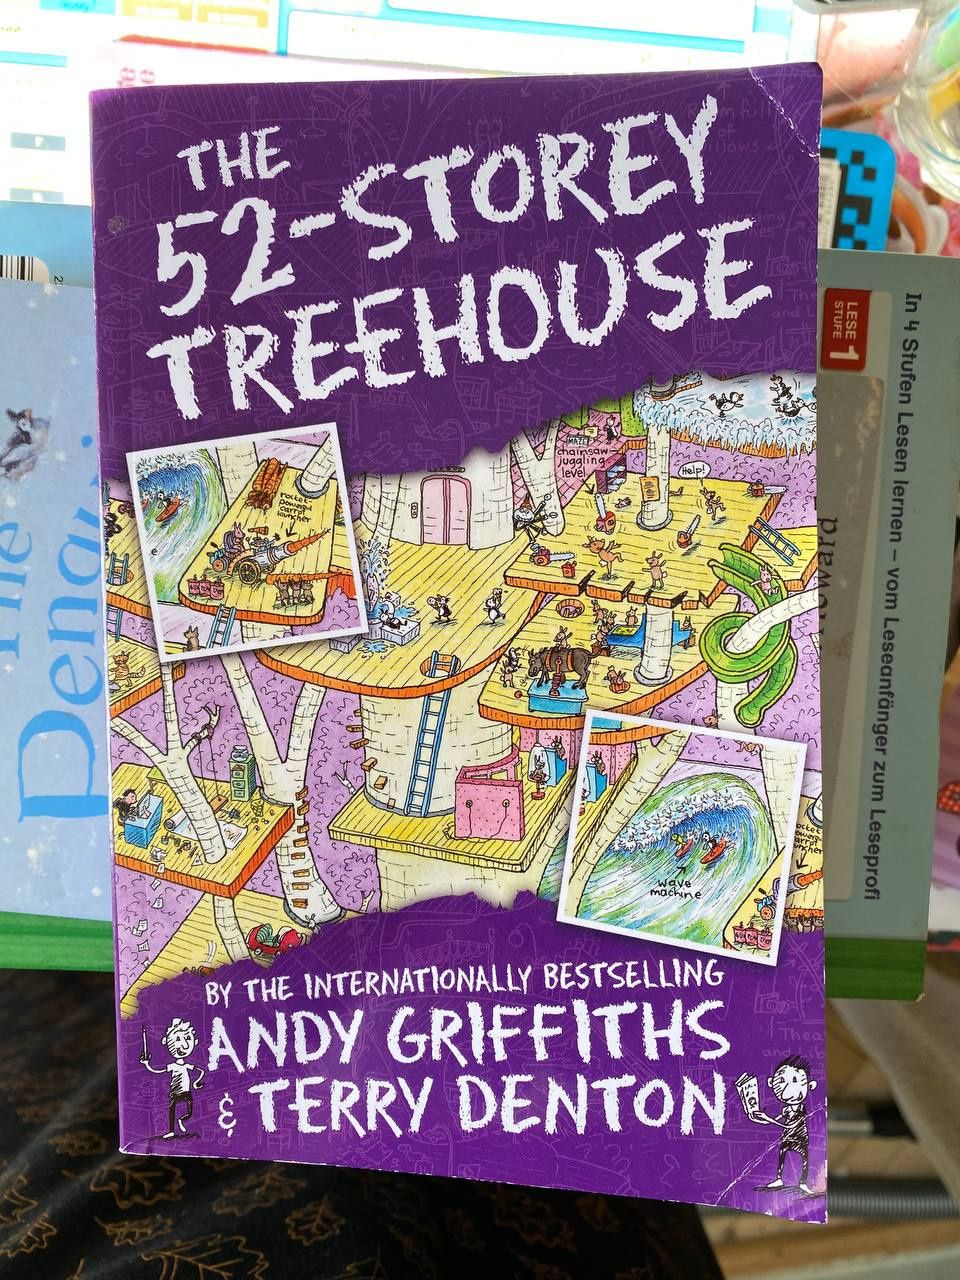 The 52 storey treehouse Andy Griffiths